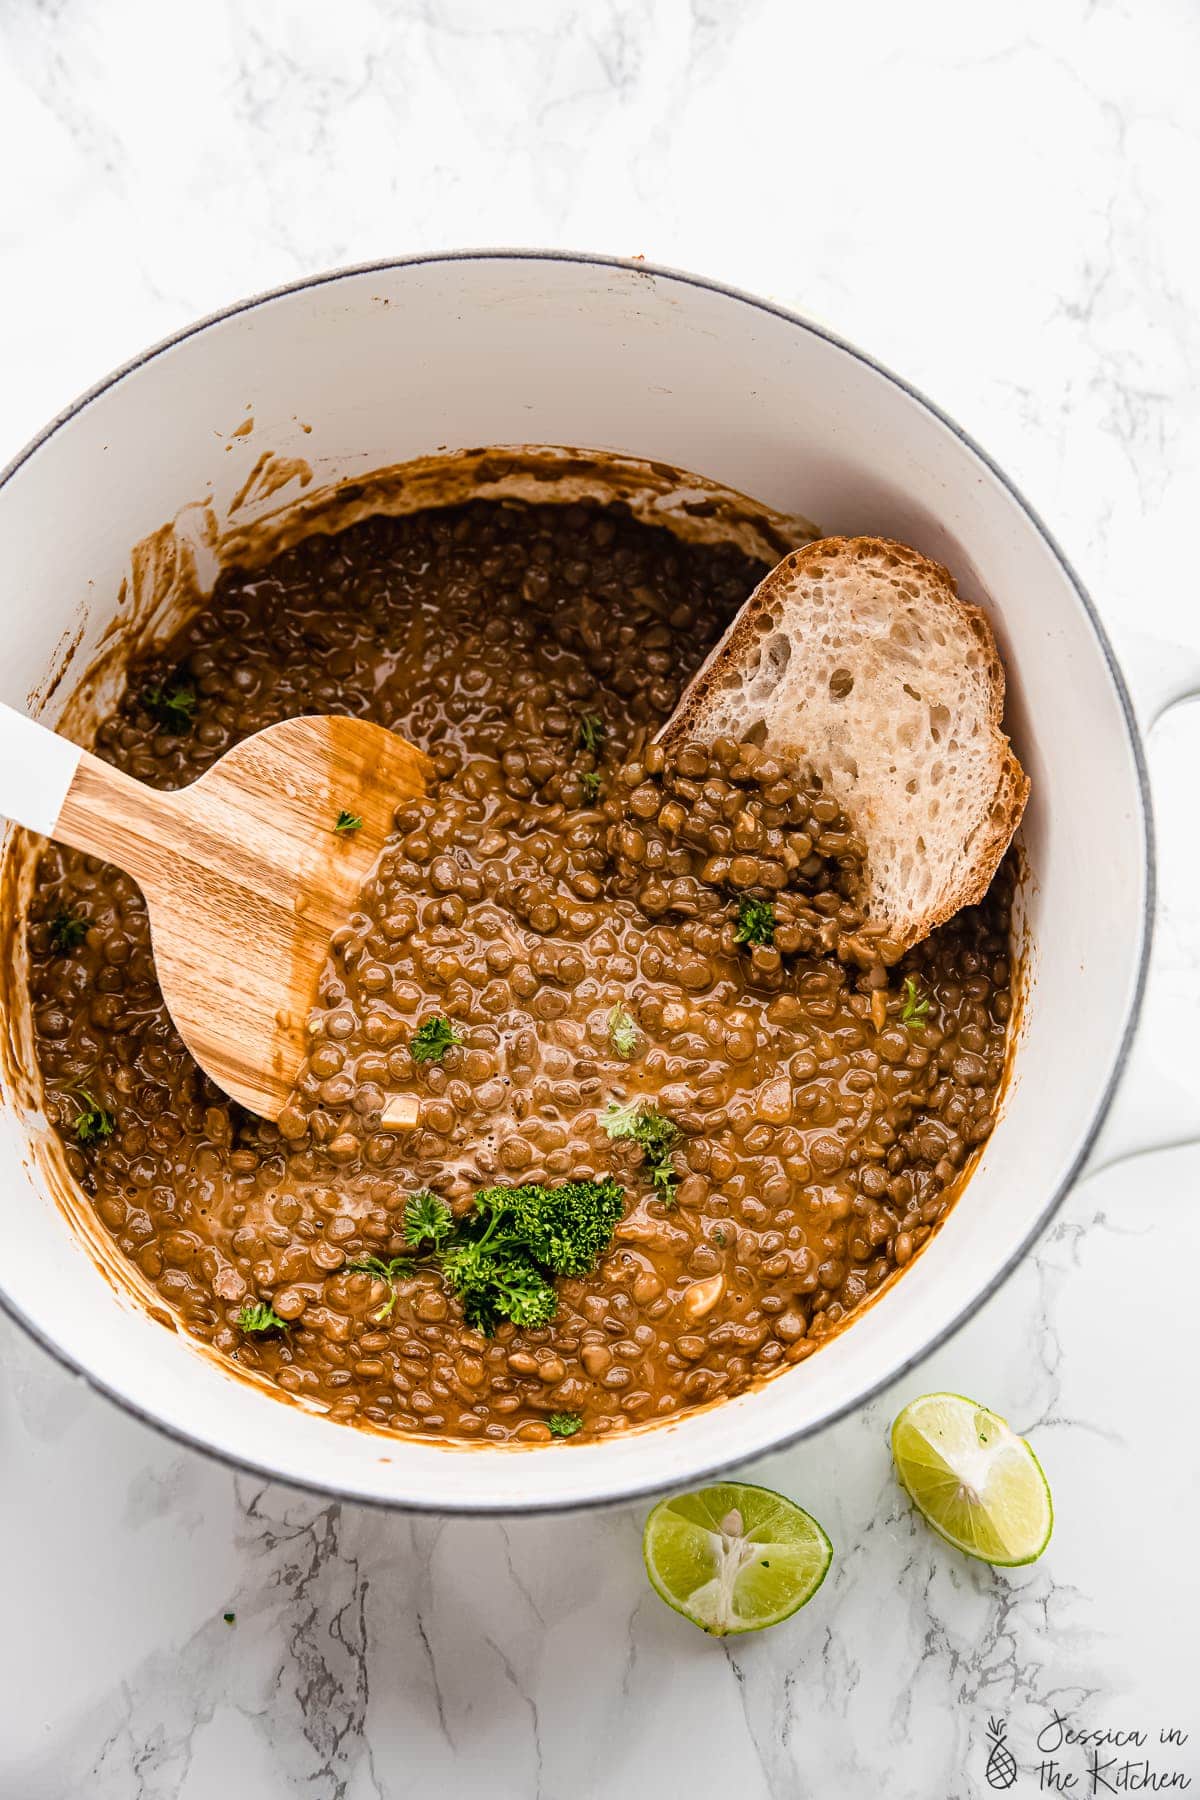 Top down view of vegan lentil stew in a pot with a slice of bread.